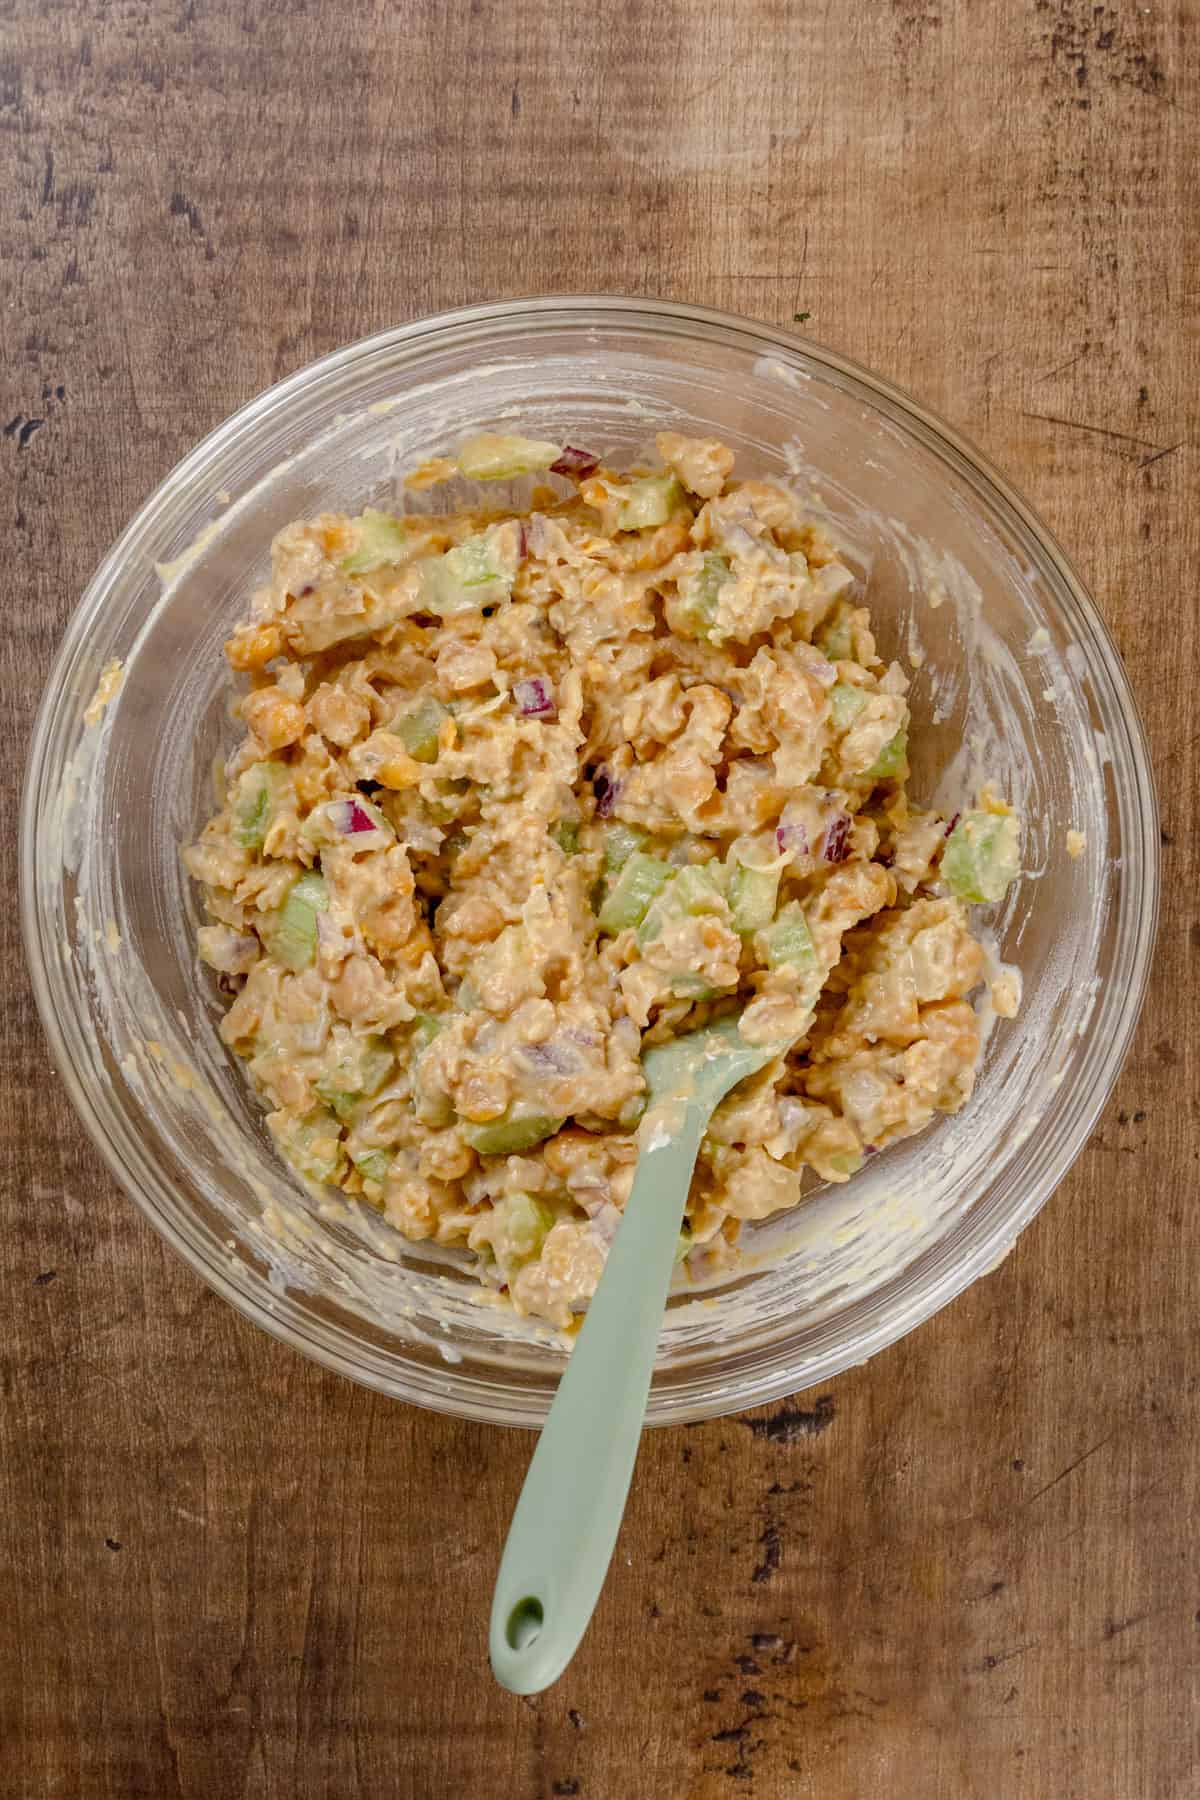 A glass bowl on a wood tabletop is filled with the finished filling for a chickpea of the sea sandwich. A green spatula is in the bowl stirring.